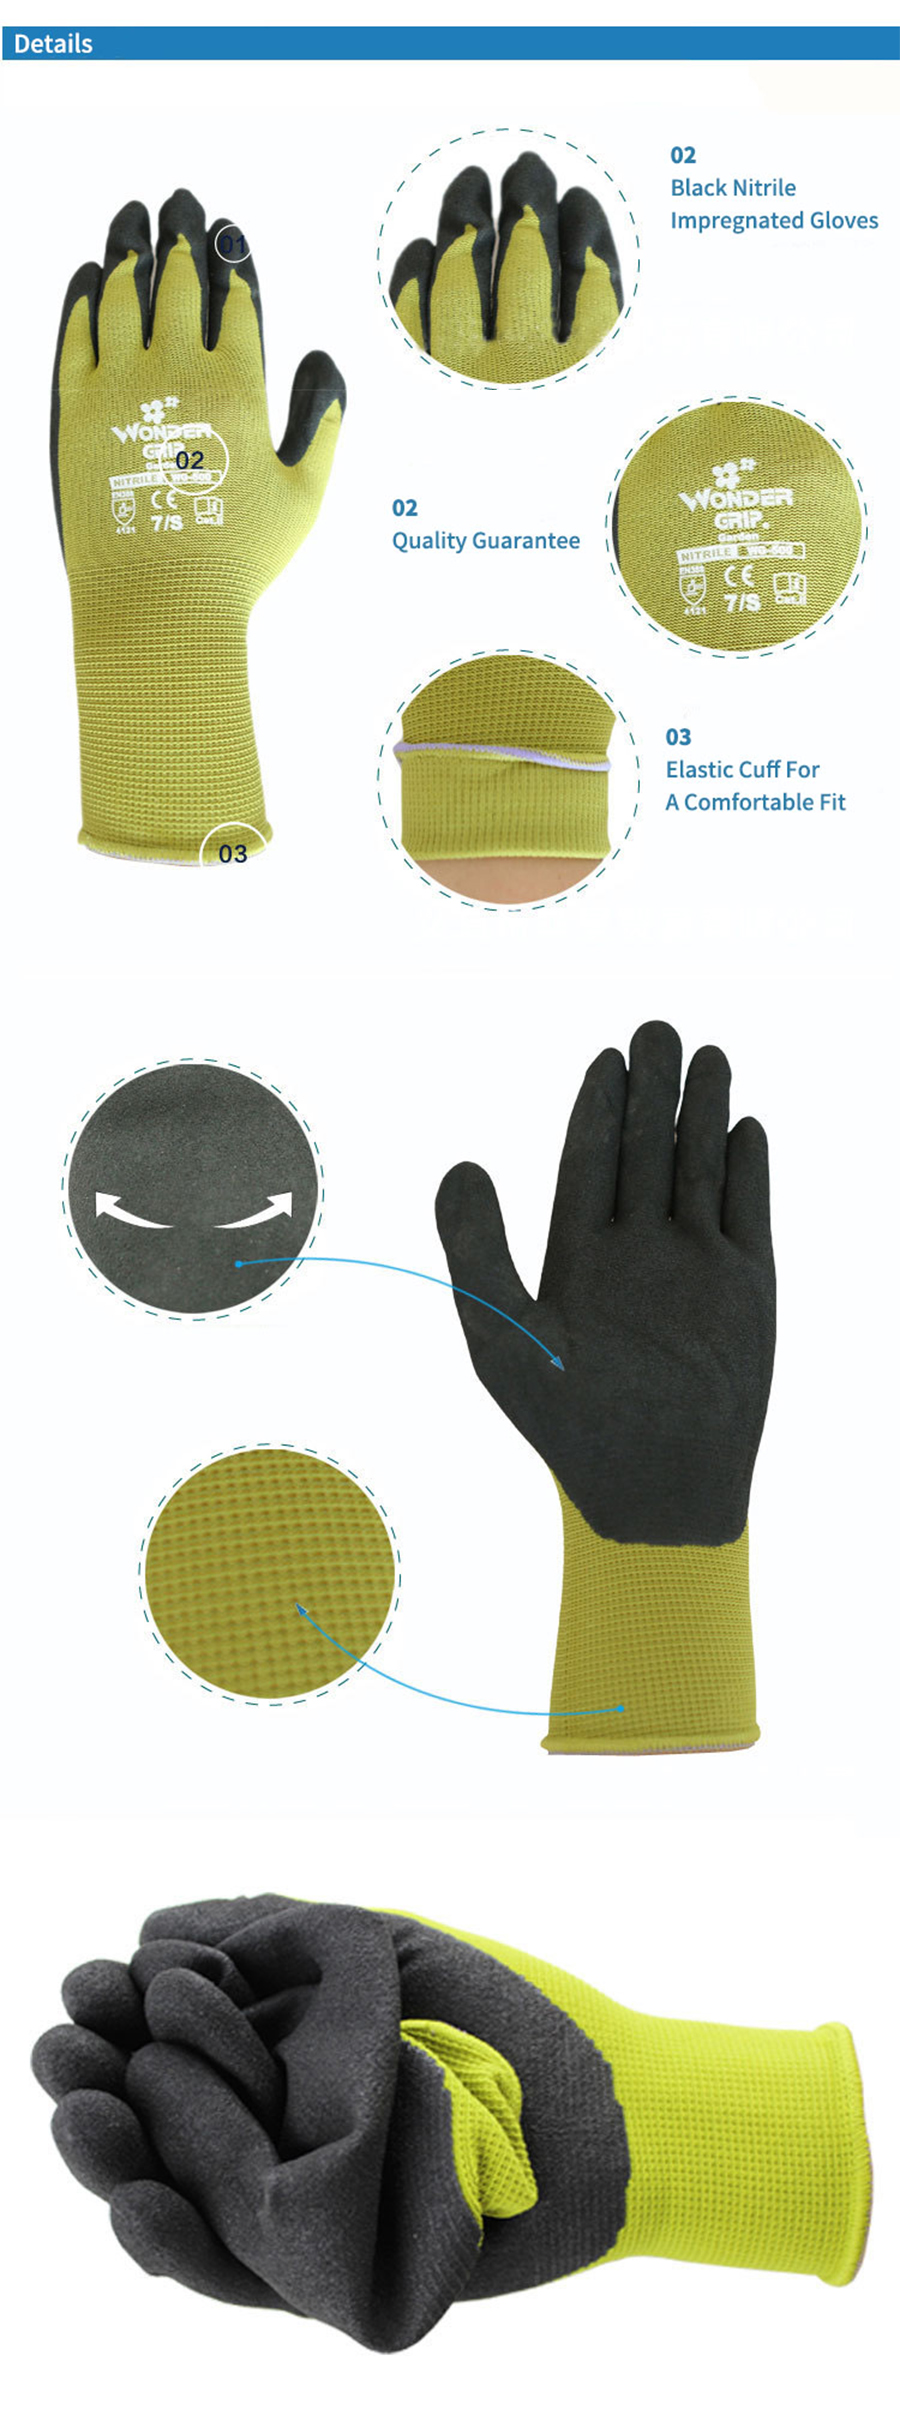 Gardening-Universal-Labour-Protection-Nylon-Glove-1-Pair-Nitrile-Coated-Gloves-Wear-Resistant-1281580